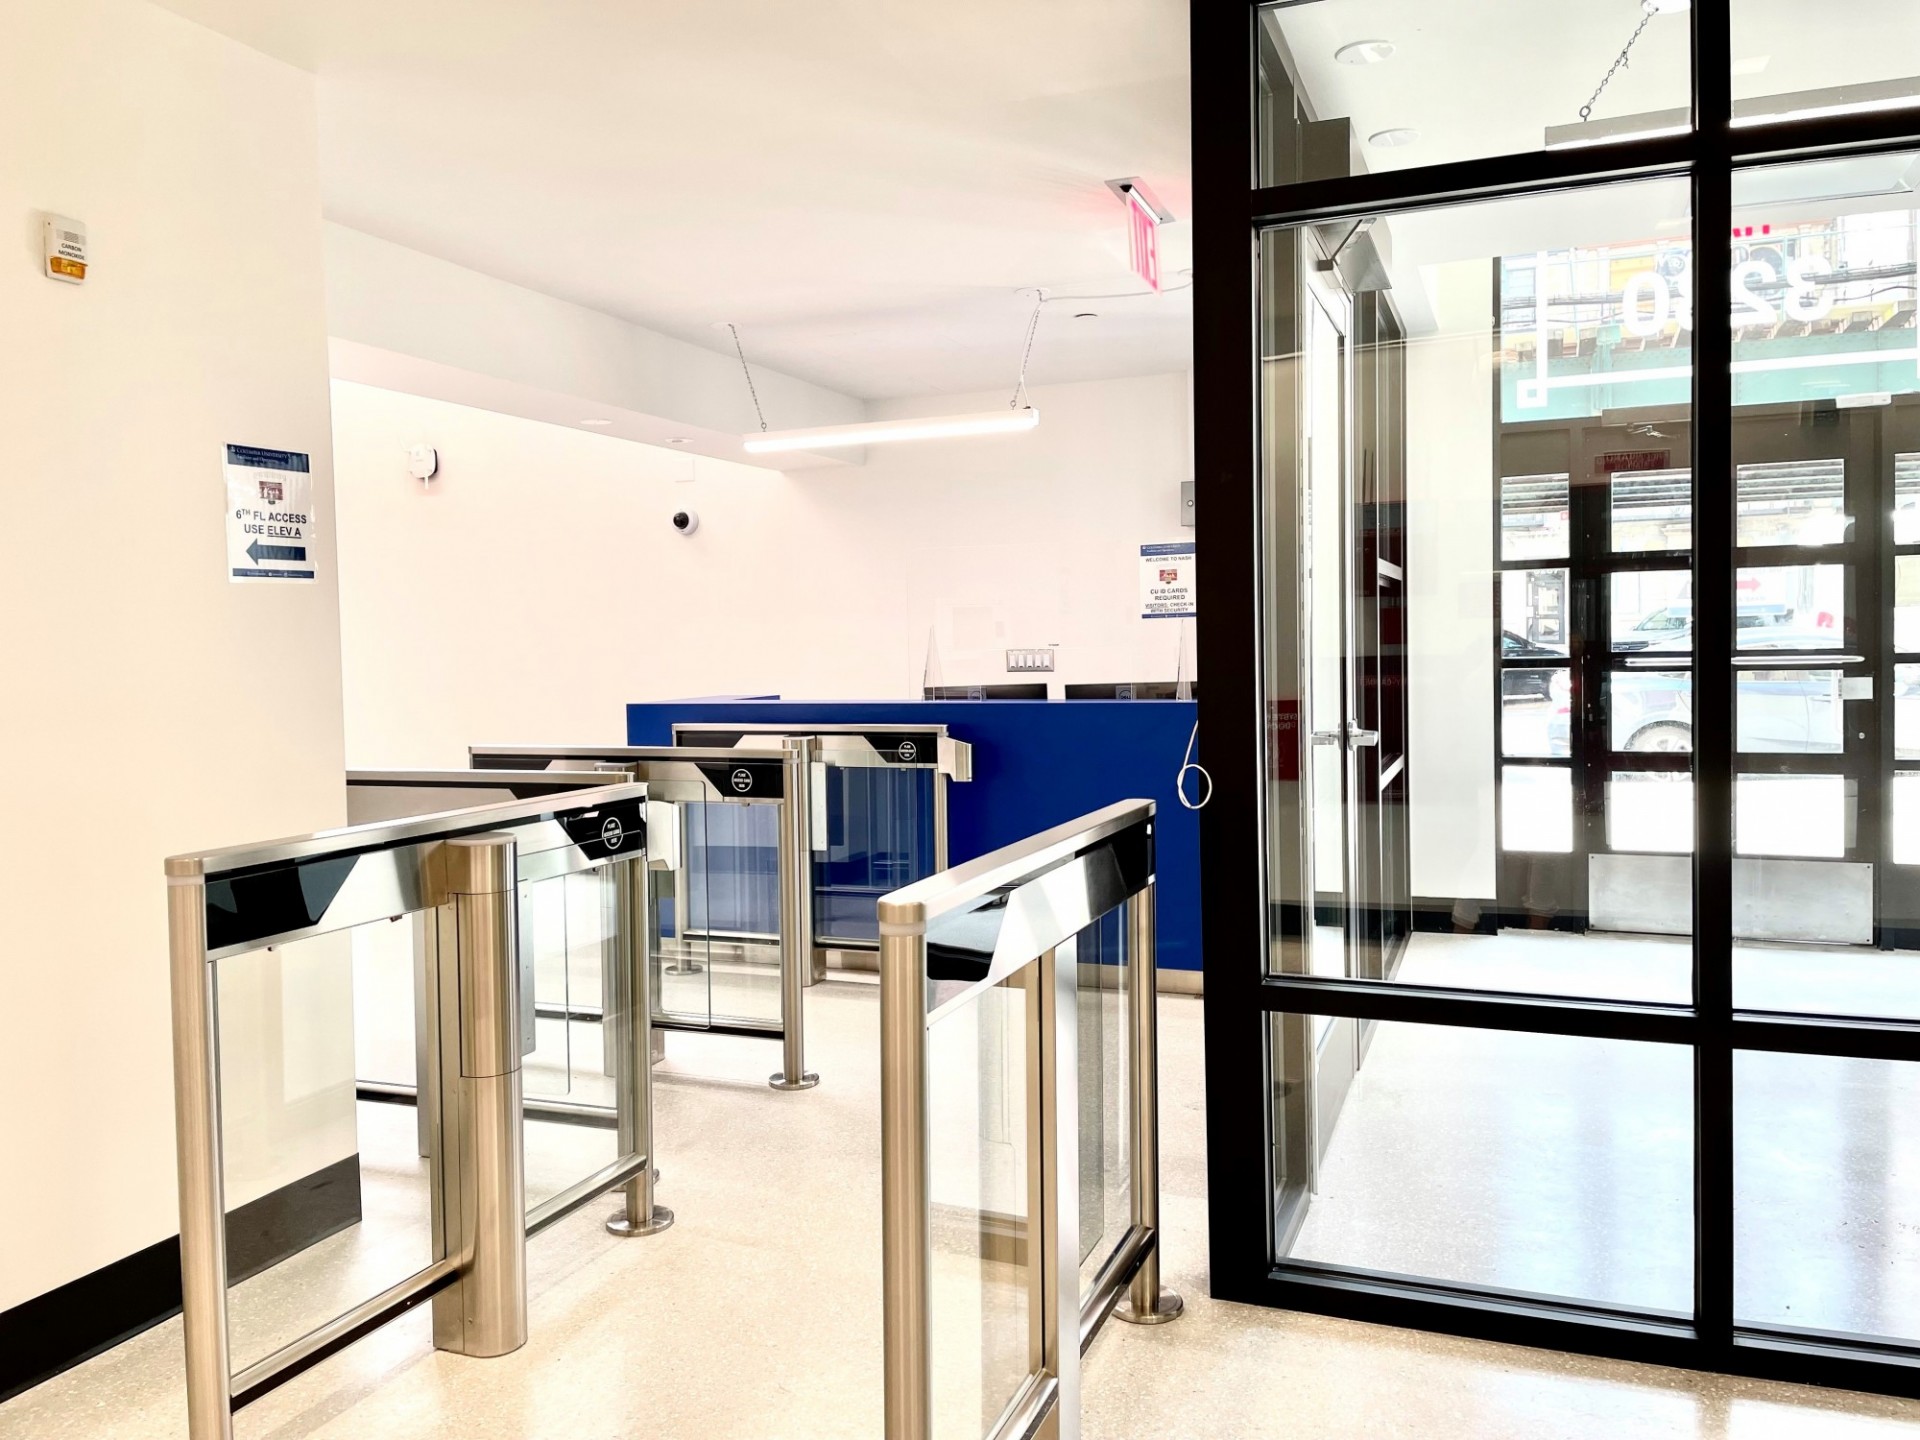 A view of the renovated lobby within the Nash Building, which new turnstiles and blue security desk.